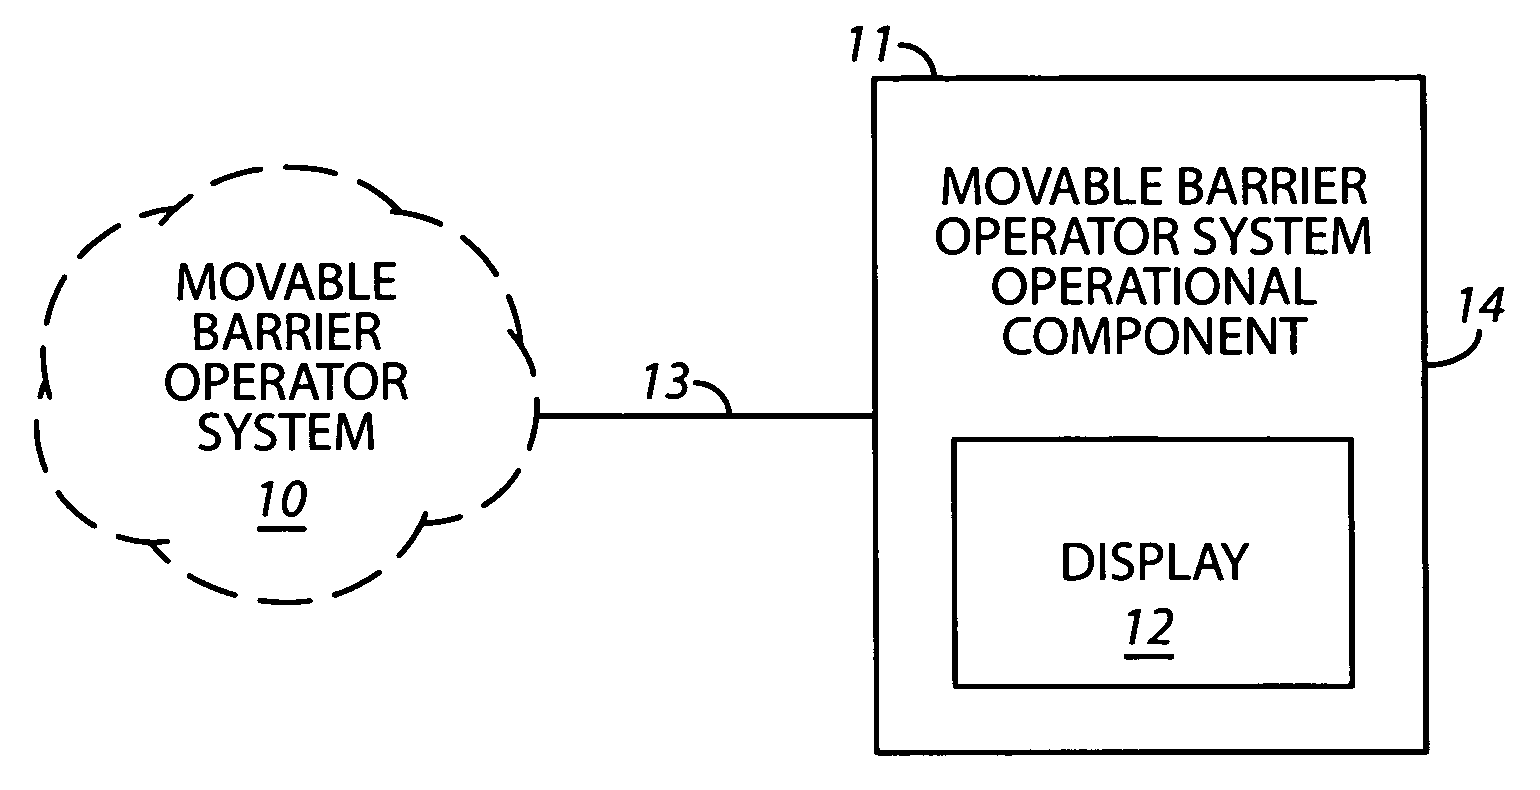 Movable barrier operator system display method and apparatus